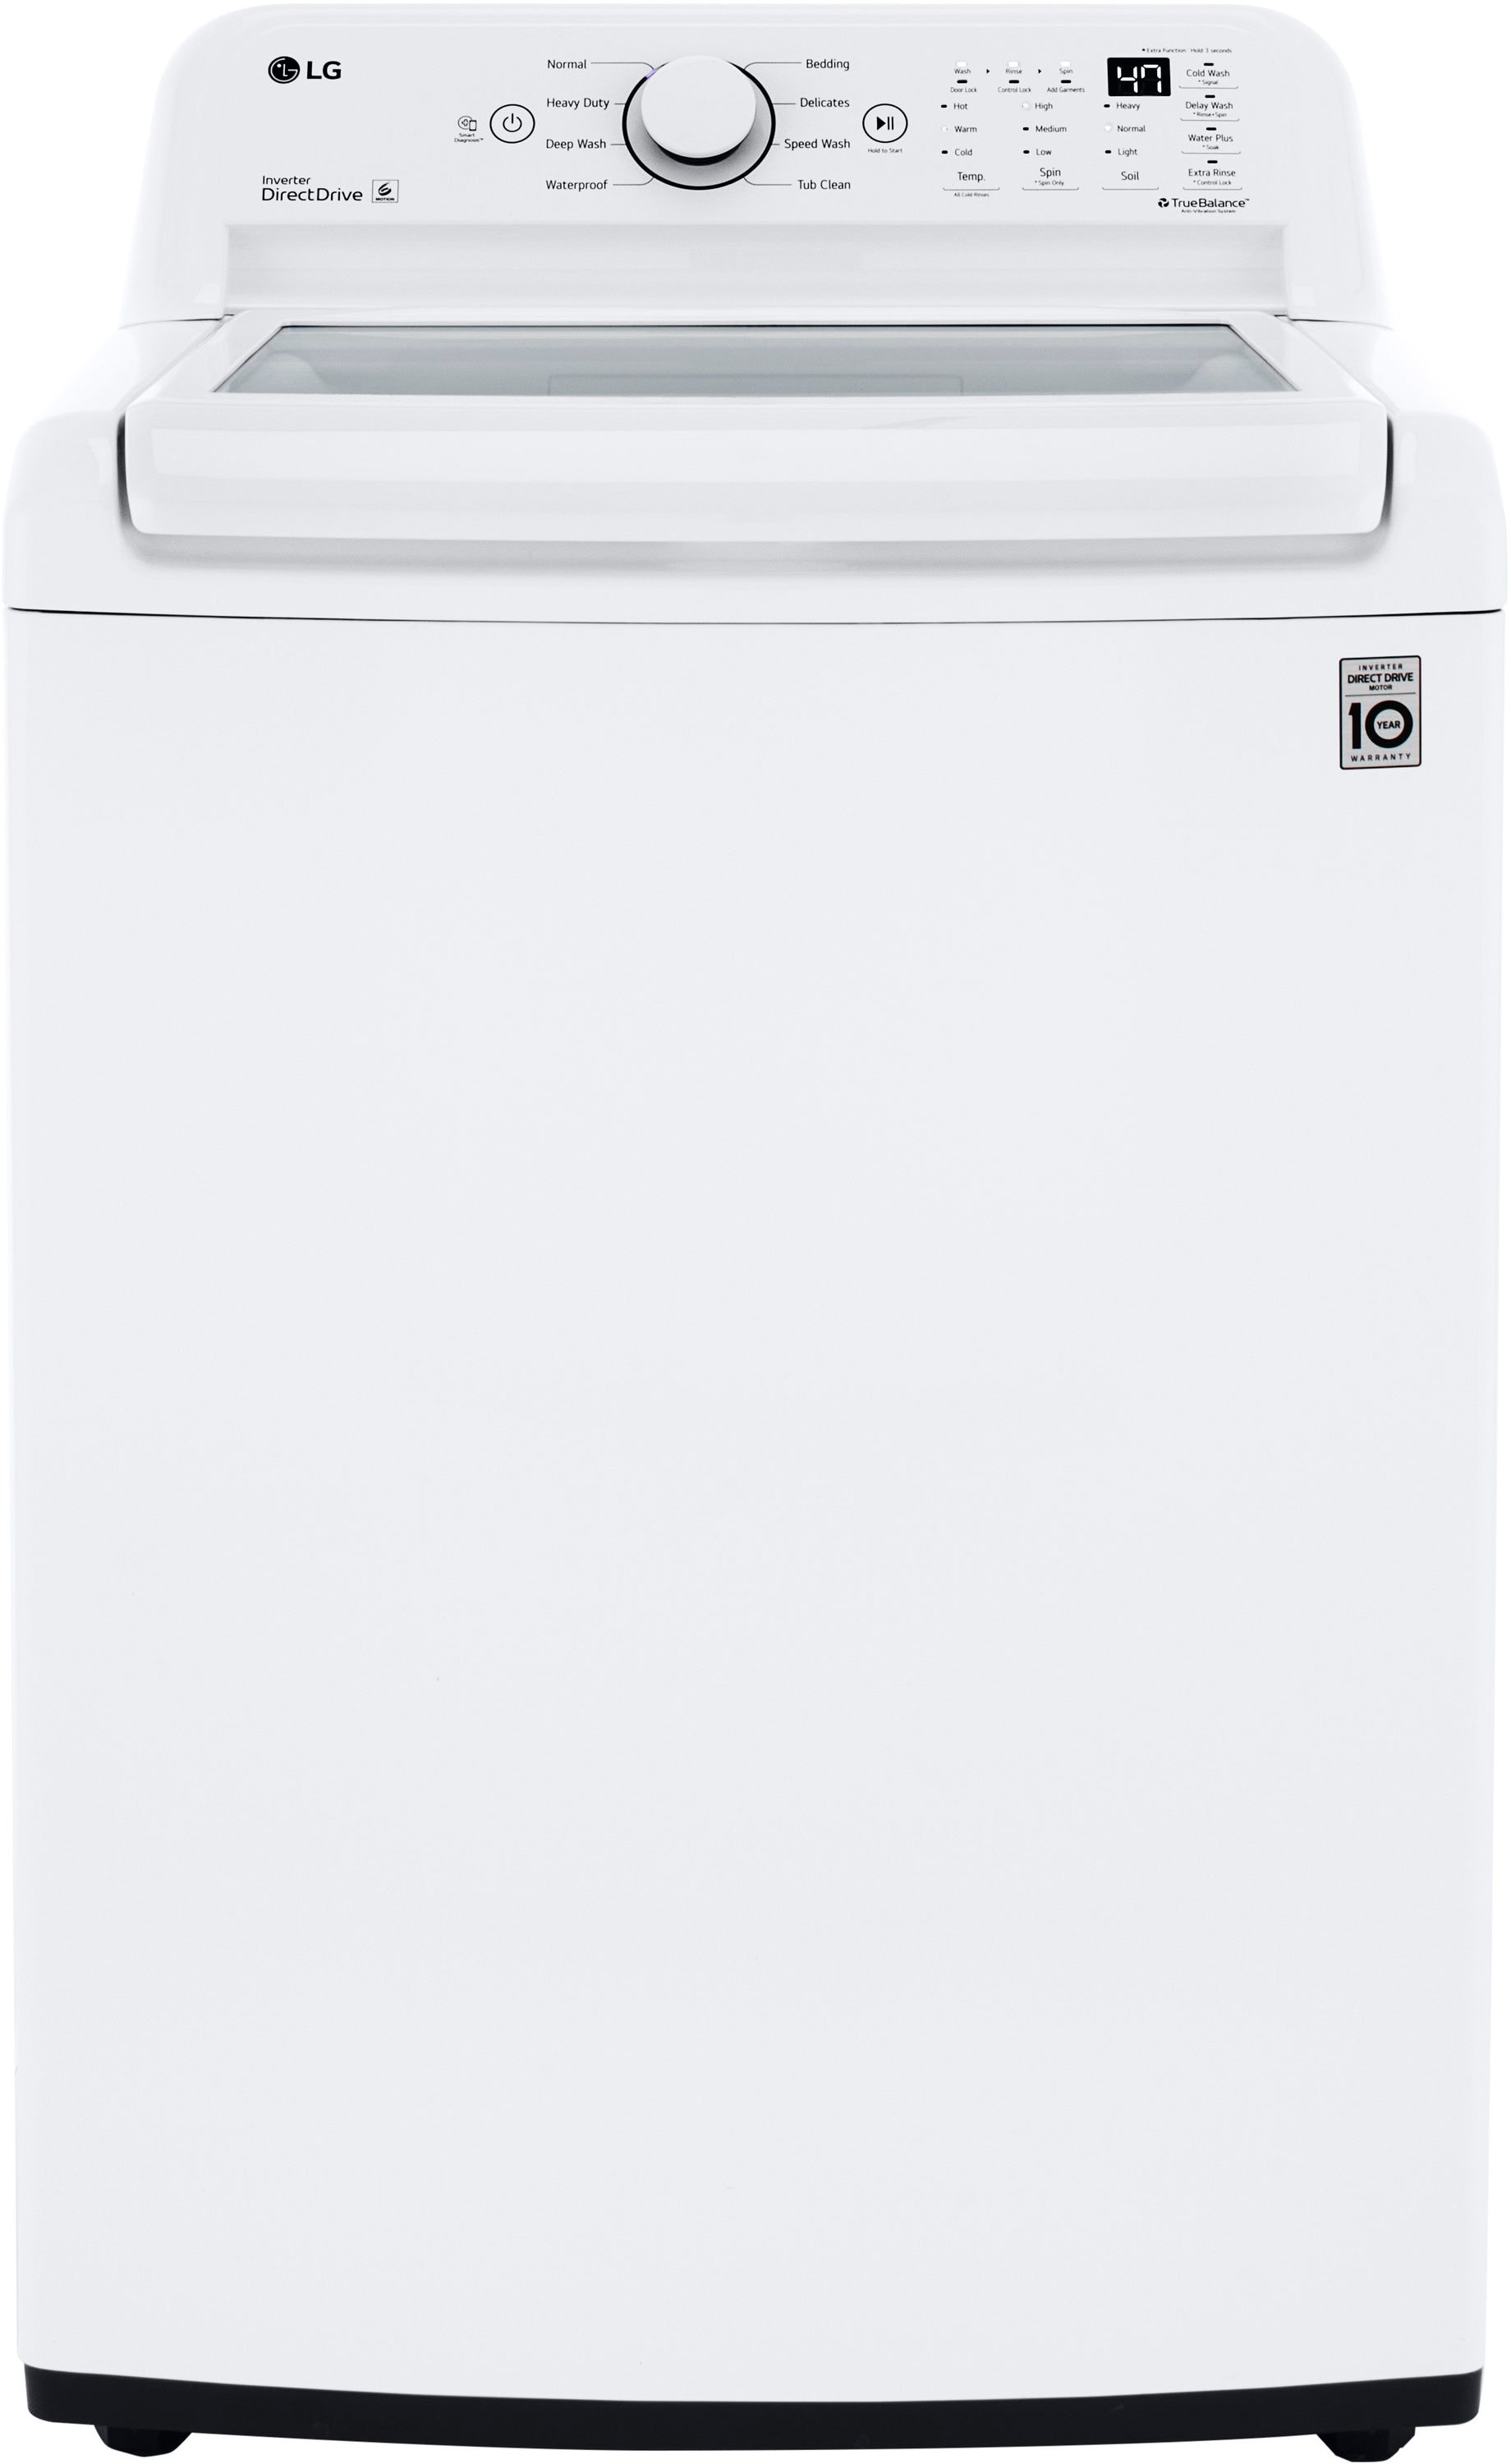 LG ColdWash 4.5-cu ft Impeller Top-Load Washer (White) in the Top